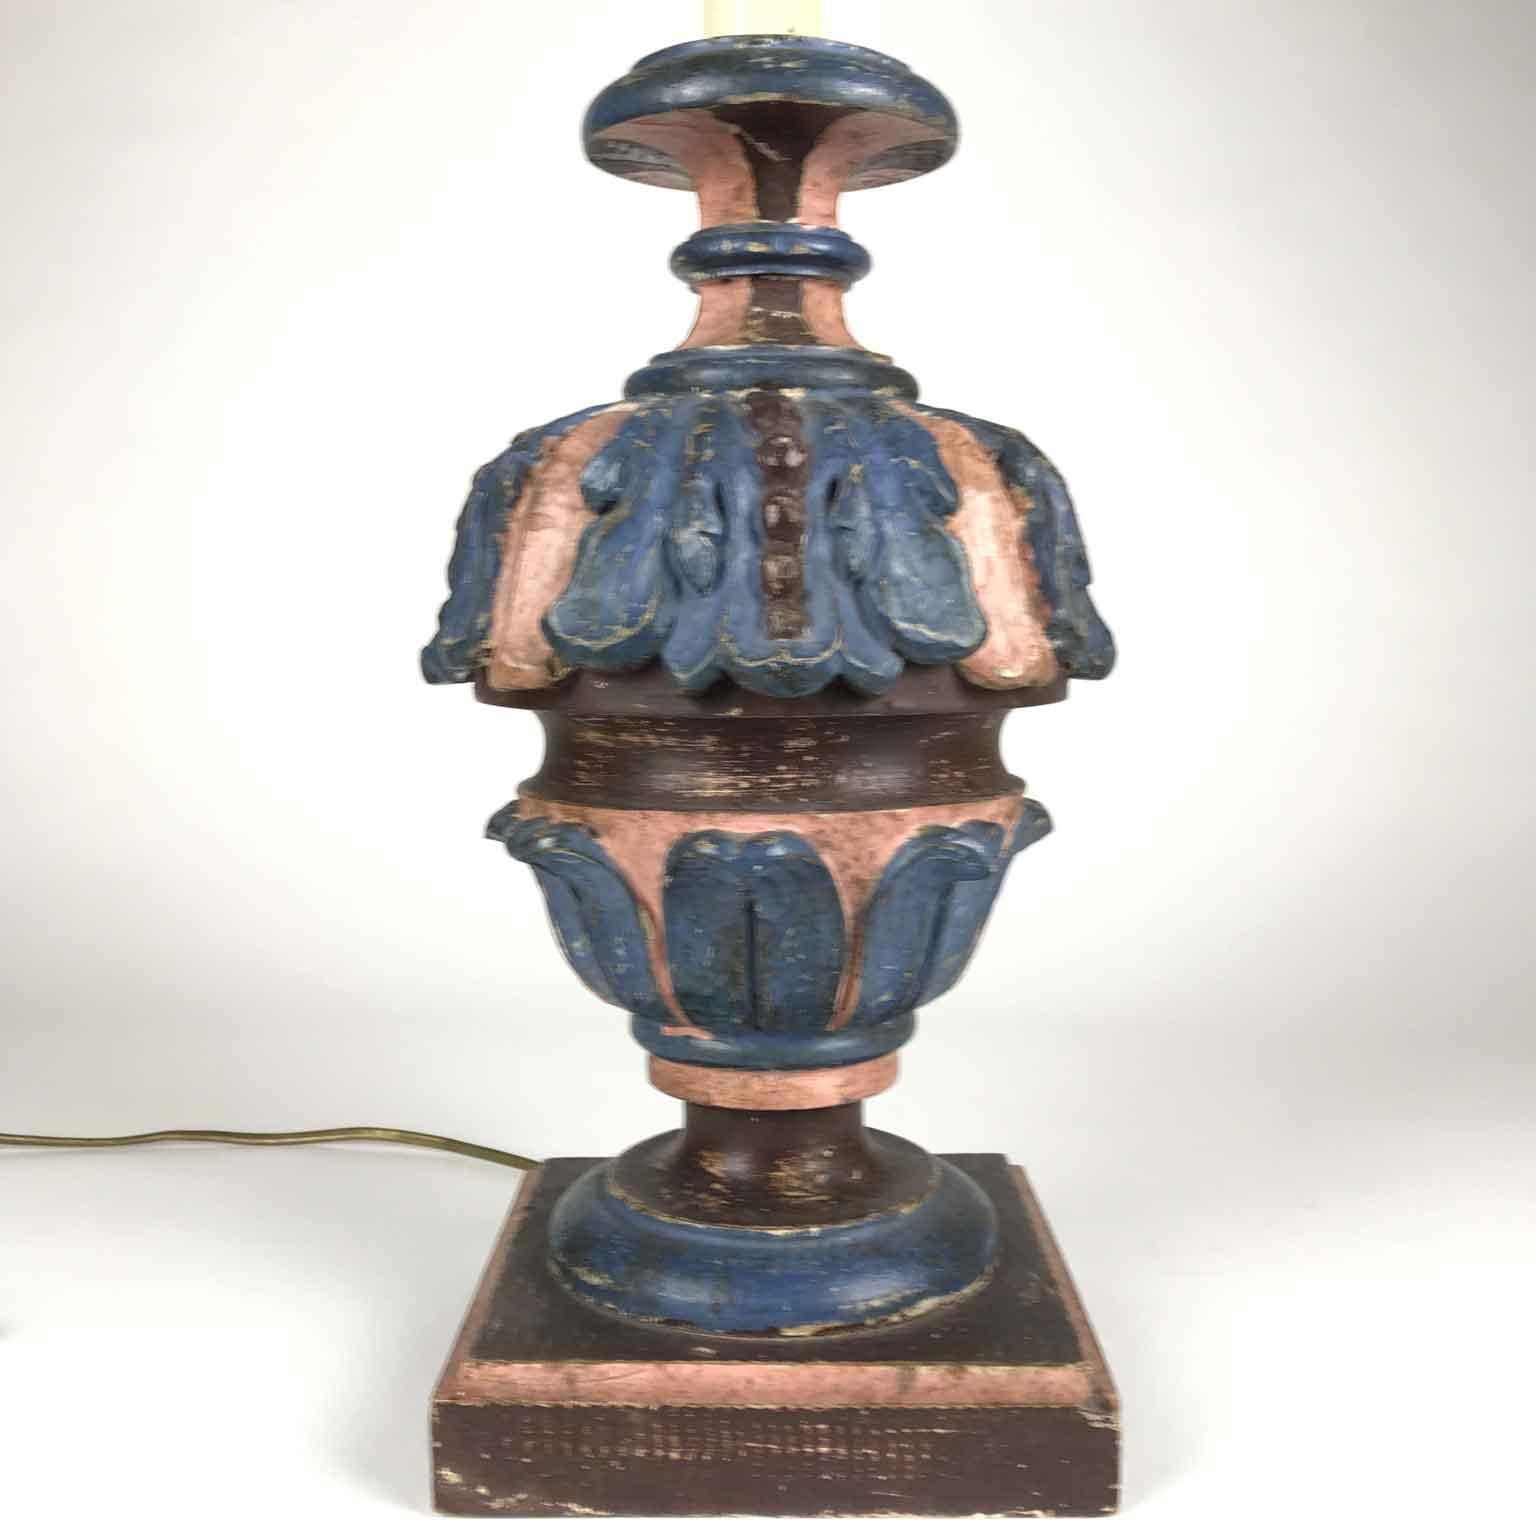 Lovely pair of 20th century Renaissance Revival style table lamps entirely handmade by Bartolozzi & Maioli in Firenze, decorated with achantus leaf carving, rose and blue painting. Both circular wooden vases stand on a square stepped base.
Each of